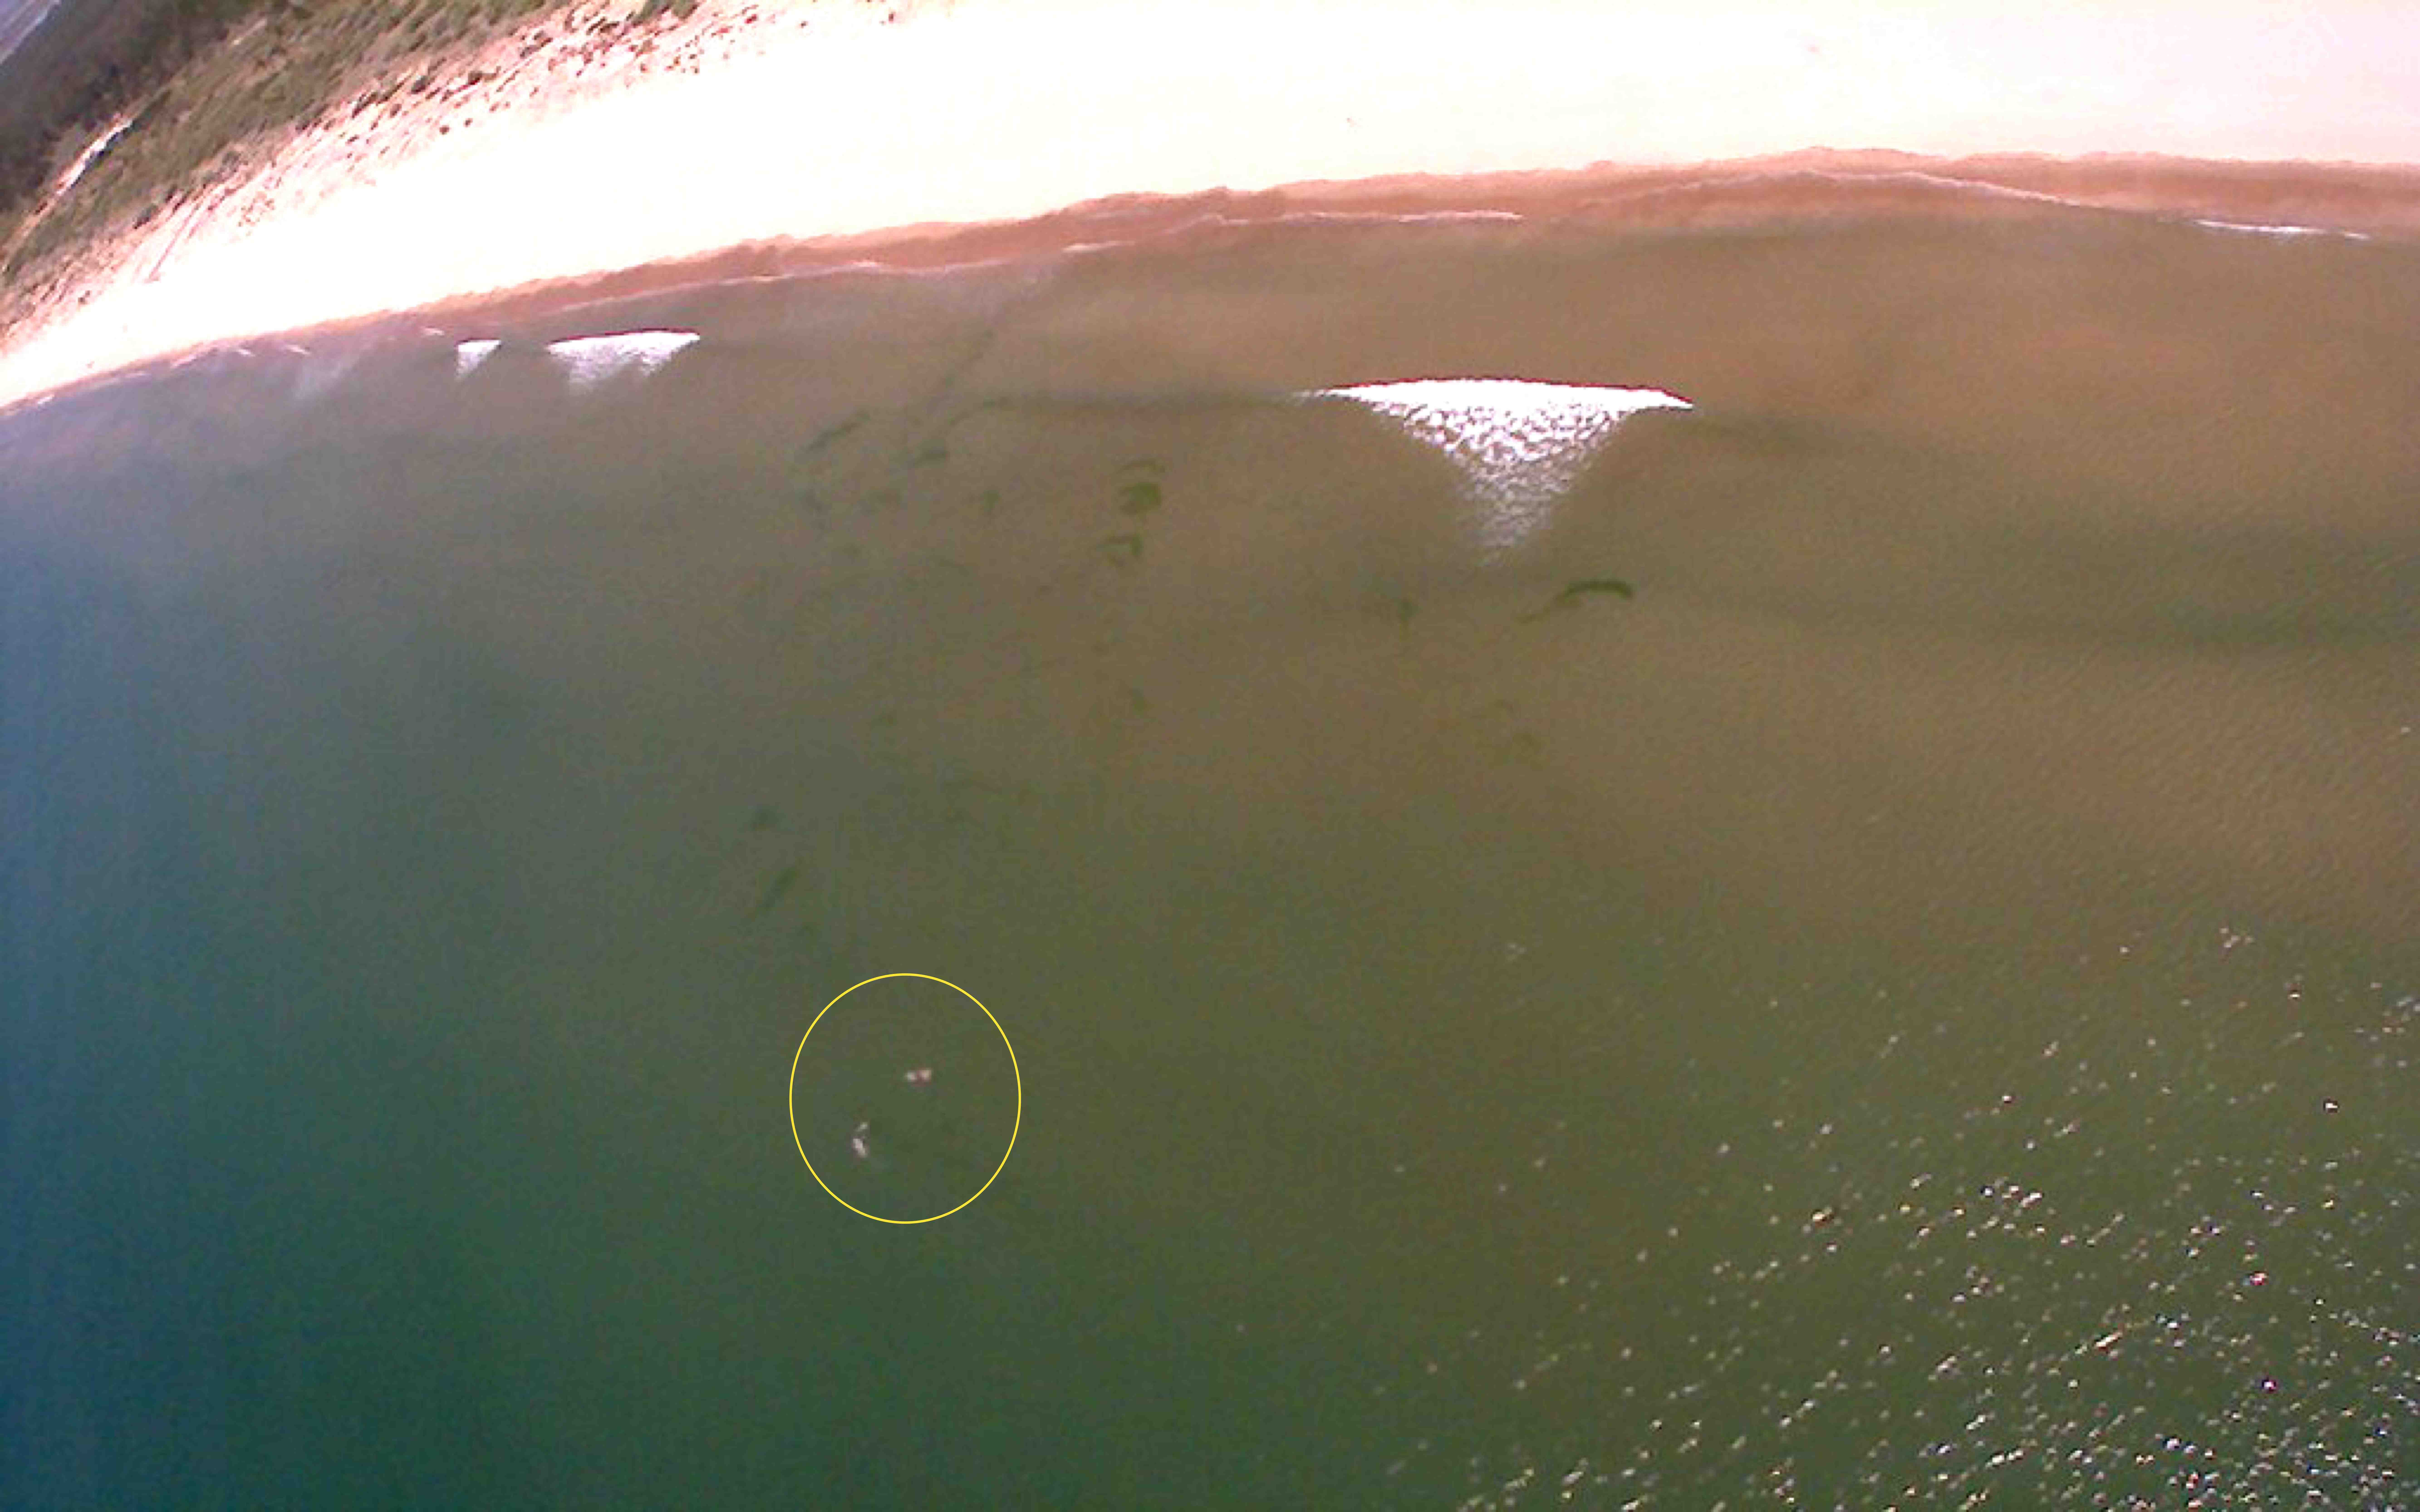 Joao and Kanna with the tagged styrofoam Mola swimming off the coast of Vila Real de Santo Antonio and being tracked by an X8 at 100m.